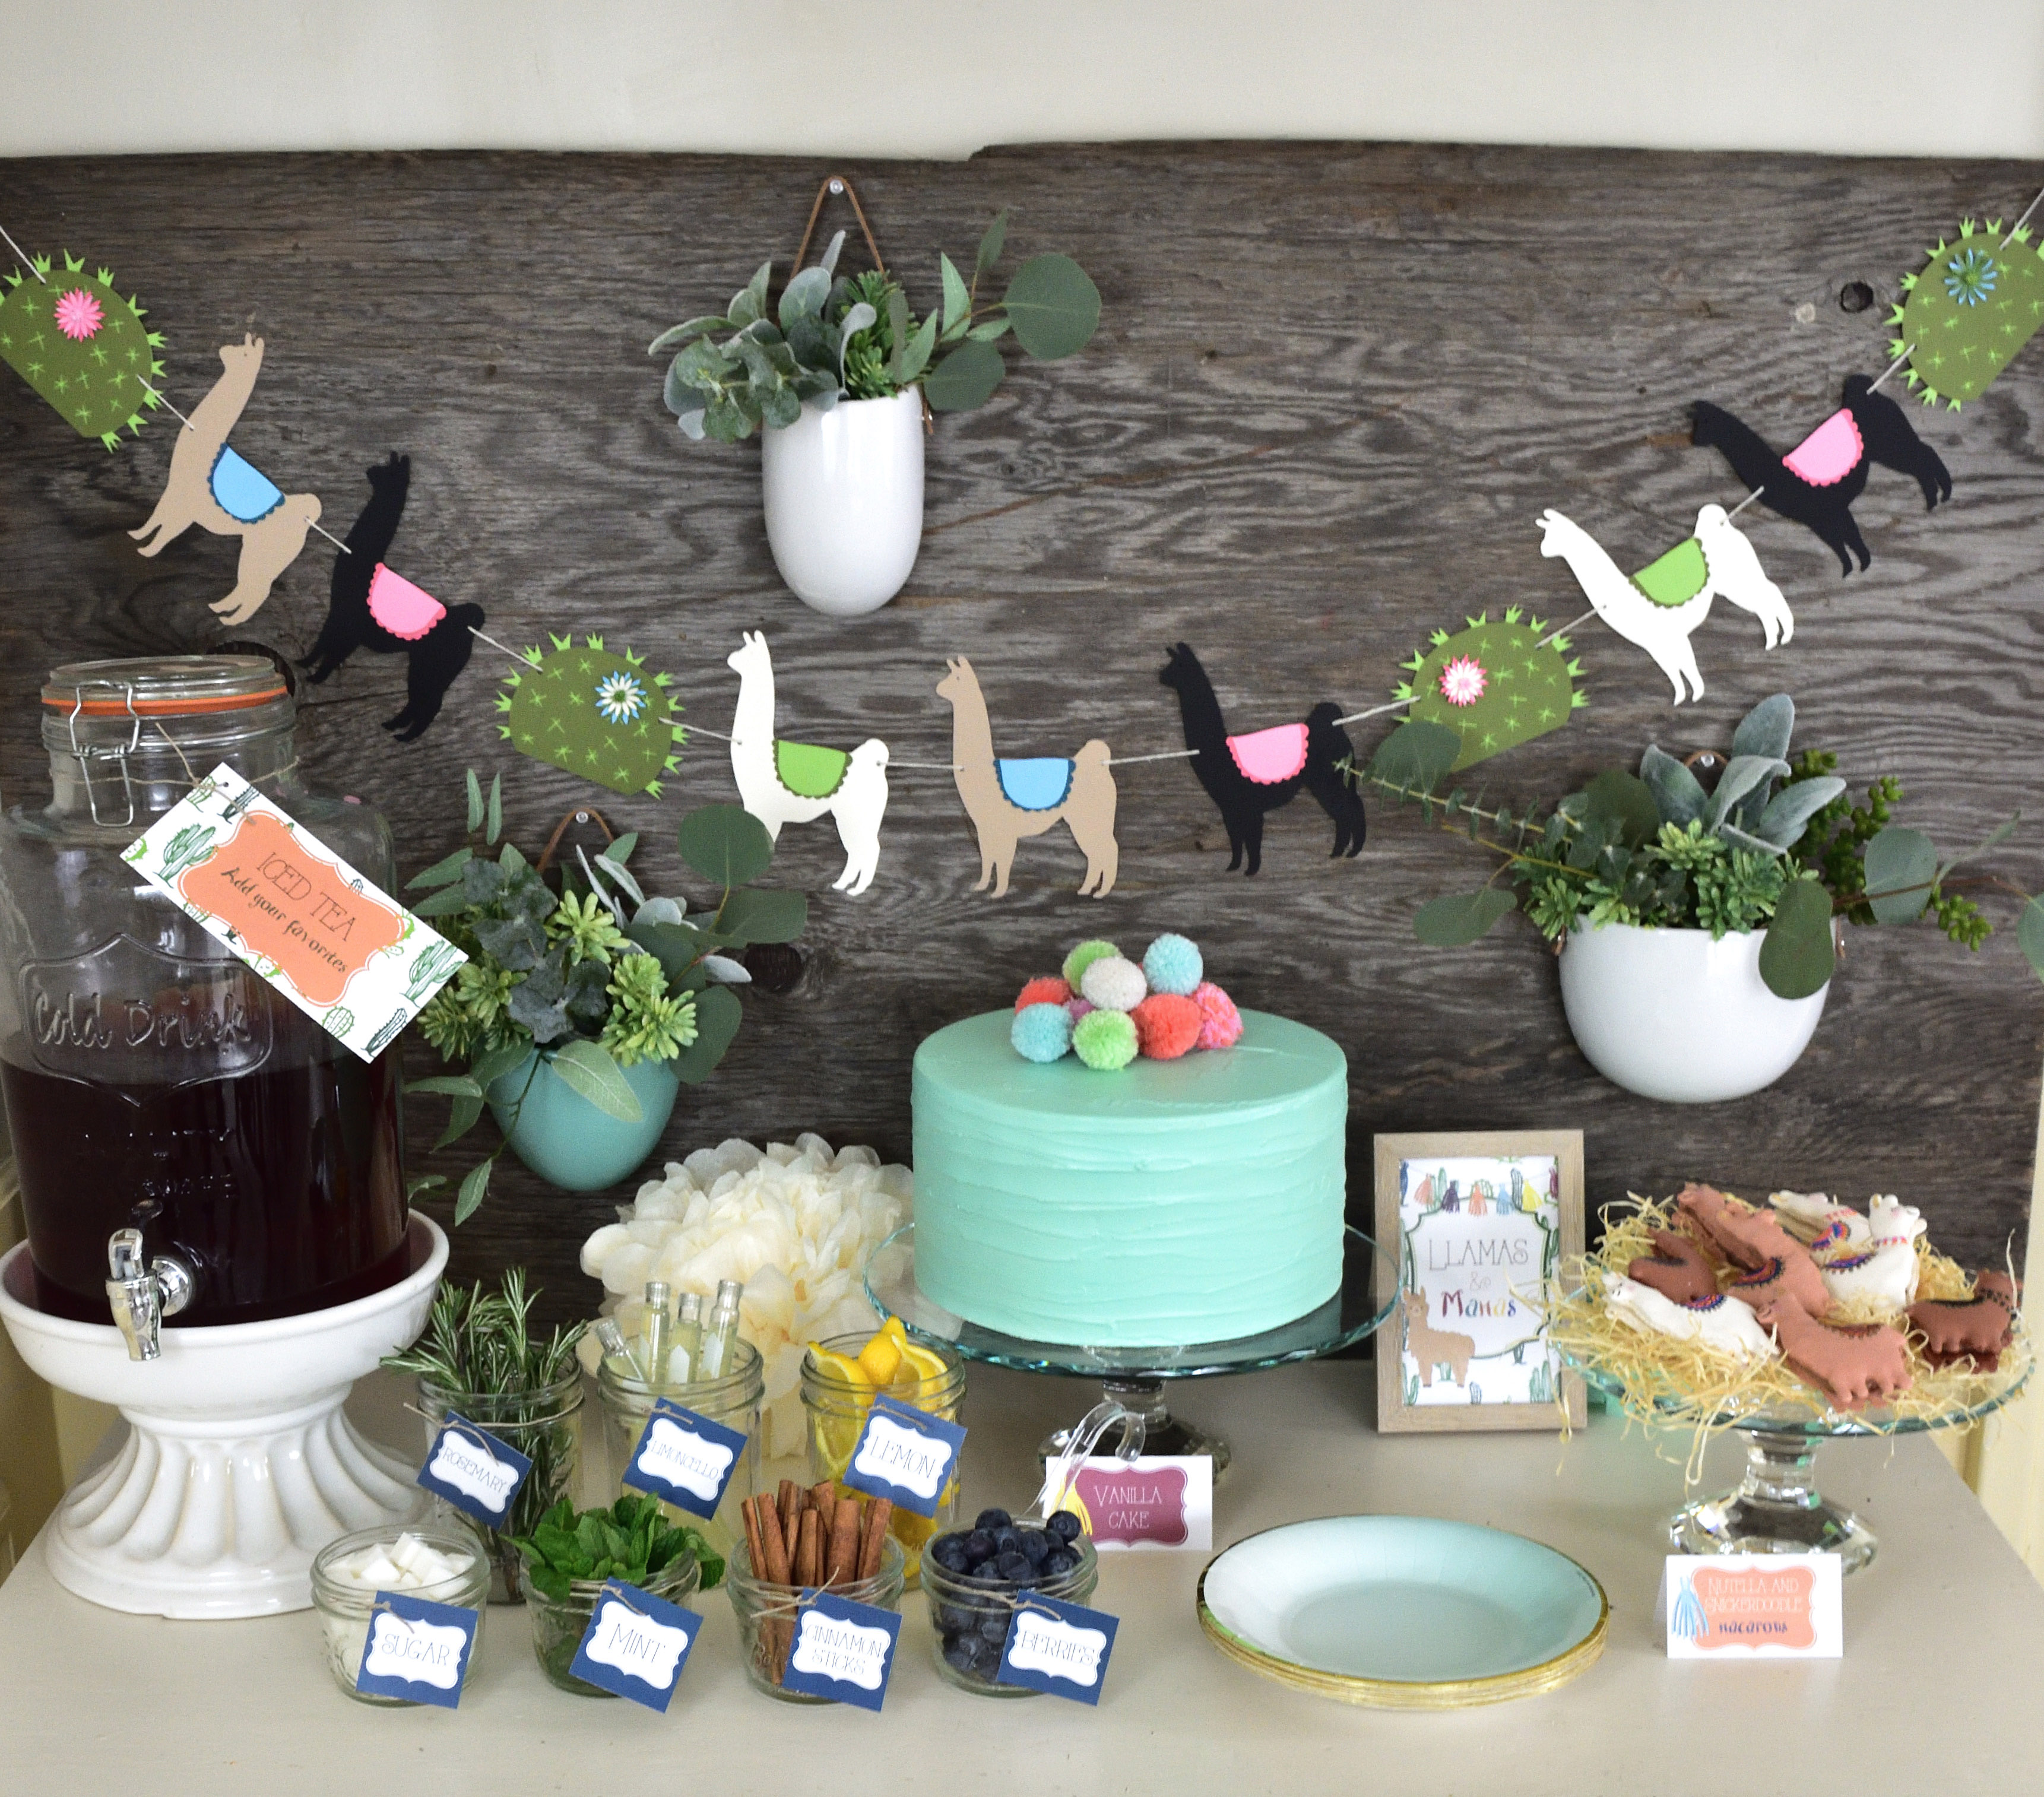 This Llamas & Mamas Mother's Day luncheon is styled by Giggle Home Furnishings with printables from Elva M Design Studio